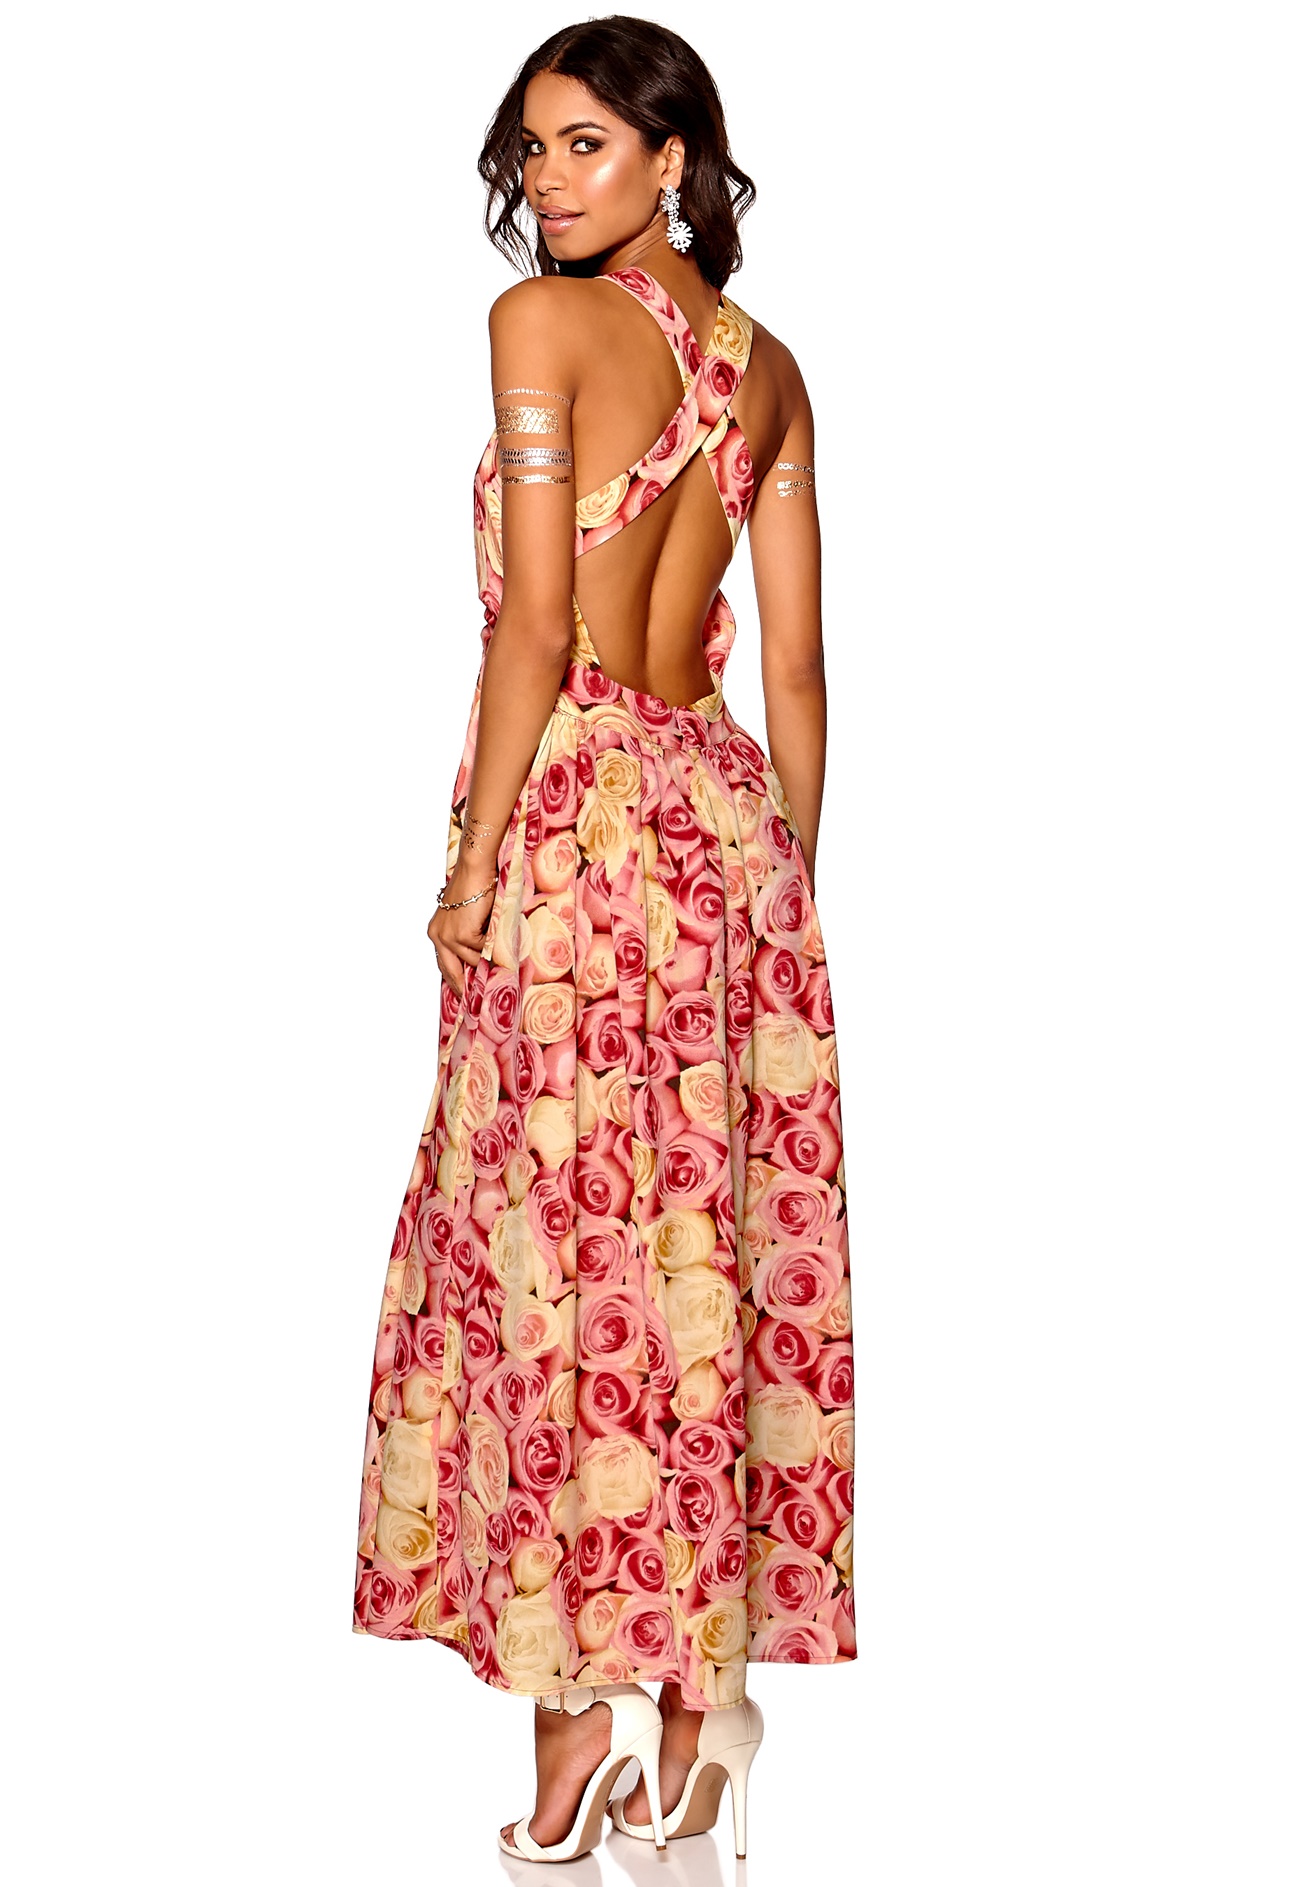 Make Way Carly Dress Pink / Yellow / Floral - Bubbleroom